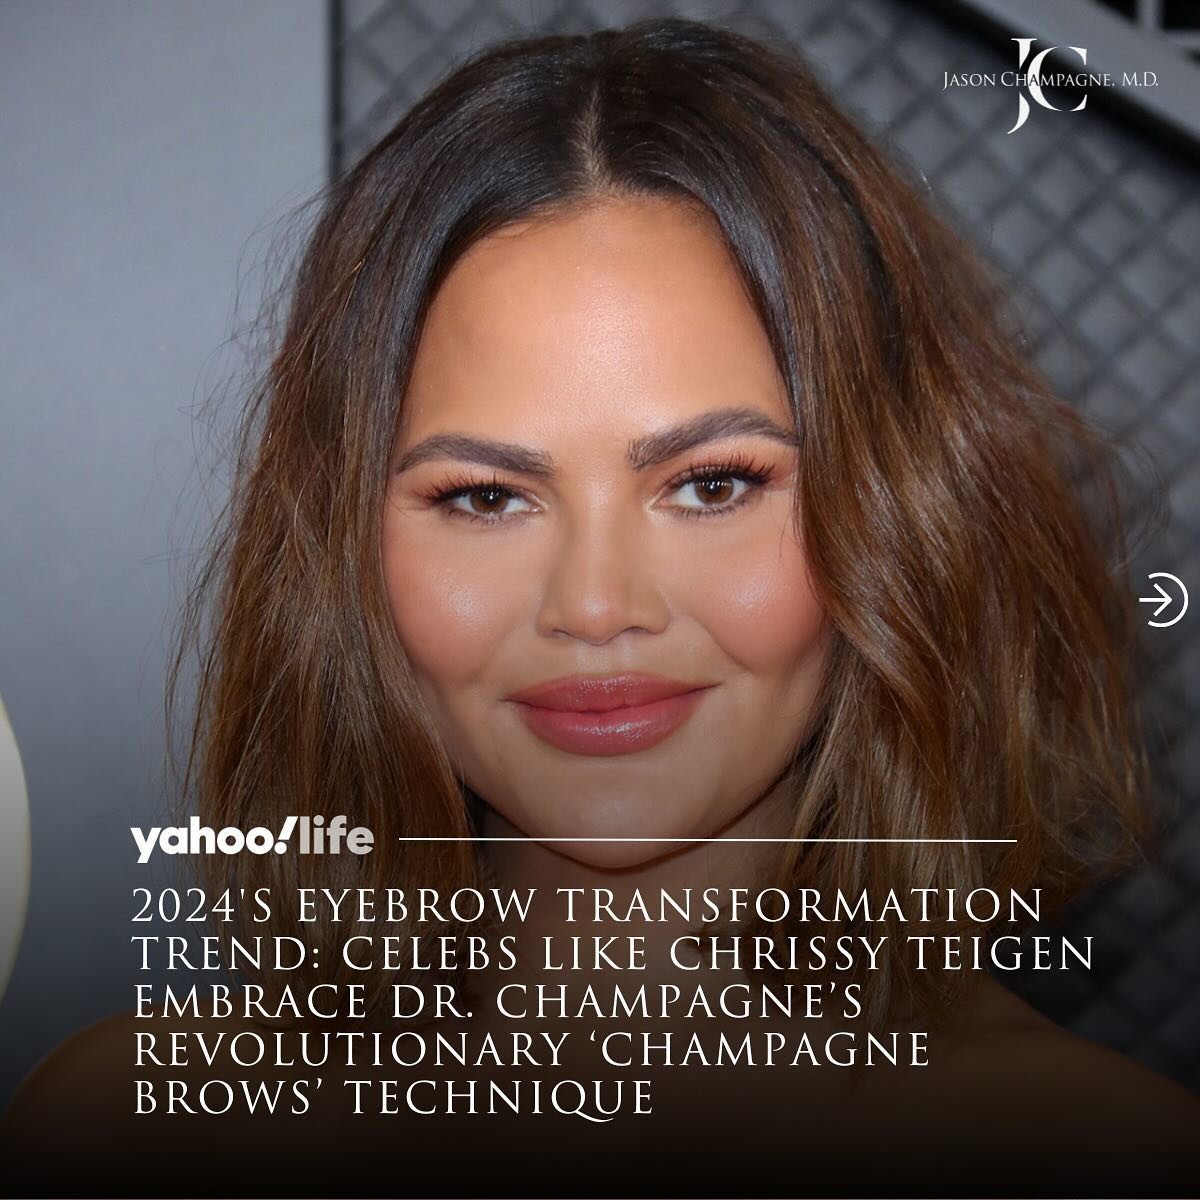 Deeply grateful for the fantastic feature on my #ChampagneBrows signature procedure. Thank you @yahoolifestyle! Swipe to read or follow the link in bio. 
#DrChampagneInTheNews 

#chrissyteigen #yahoolife #yahoolifestyle